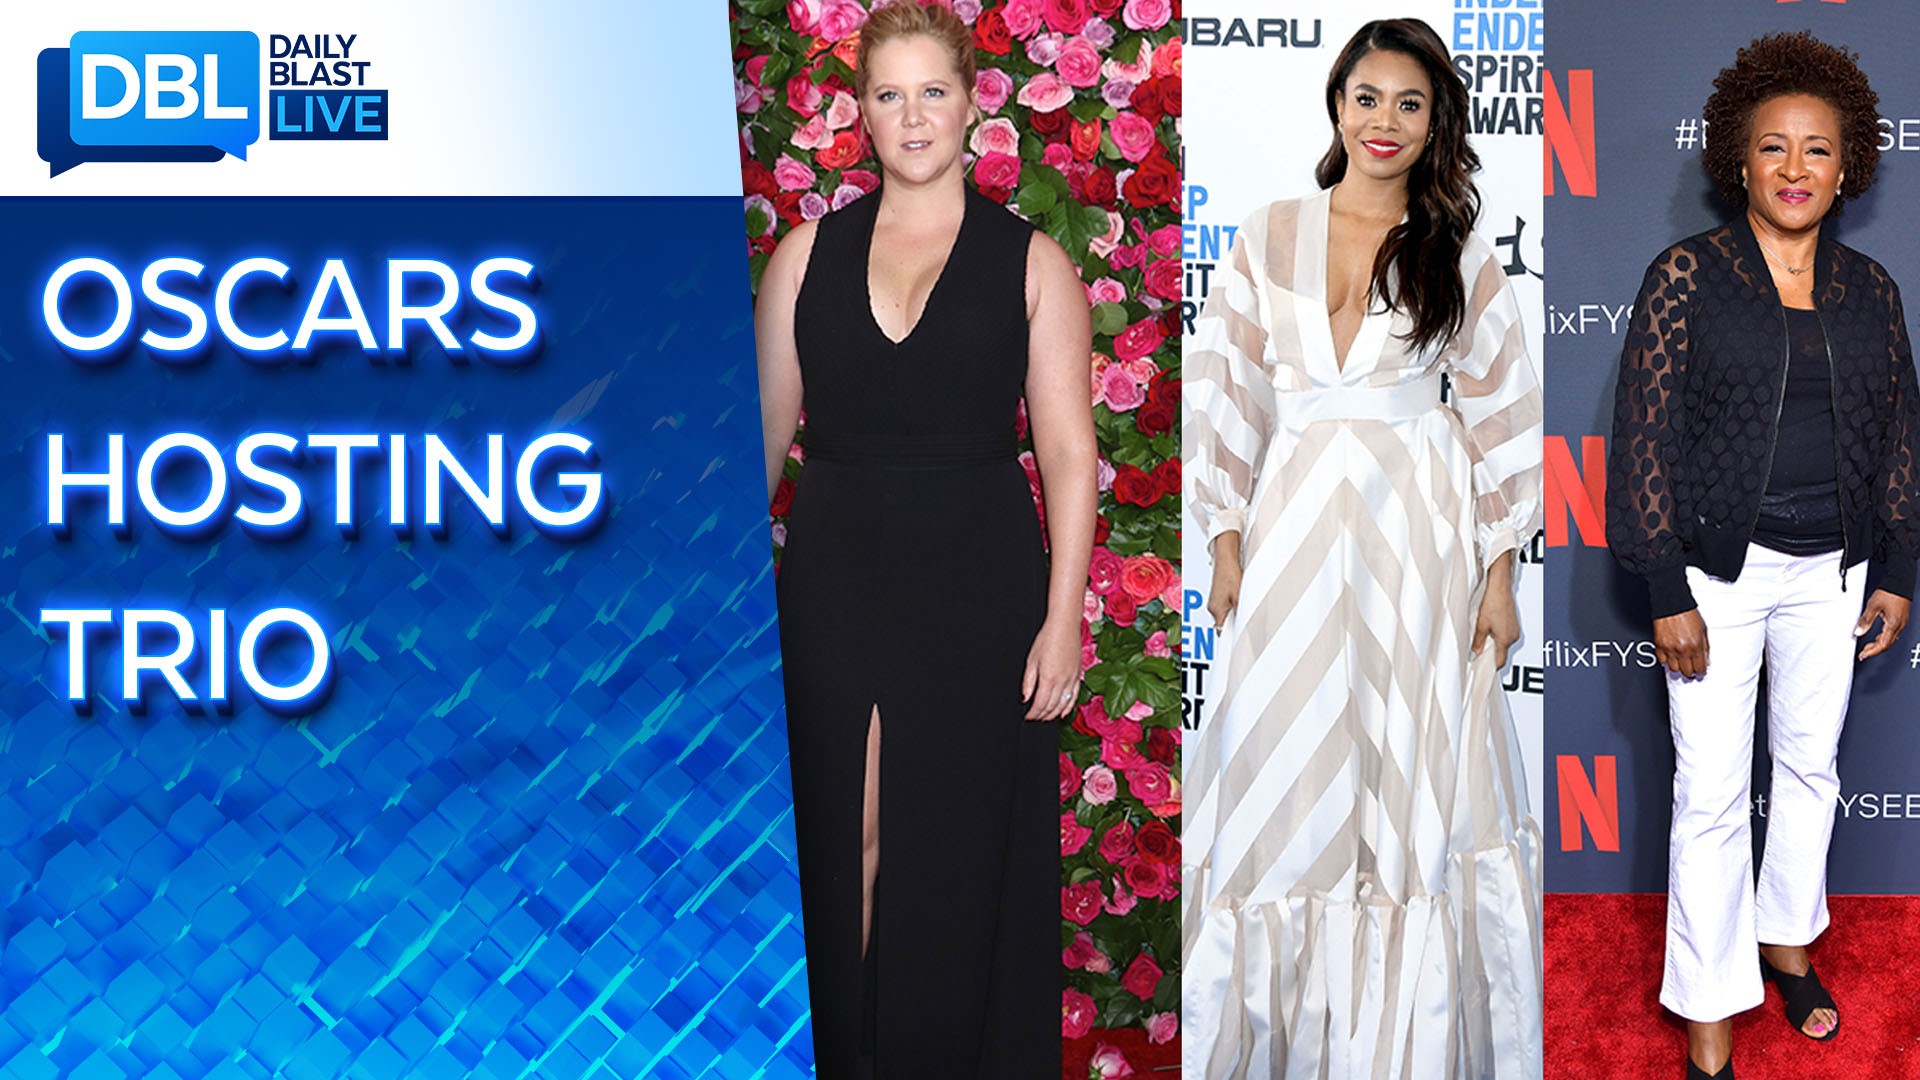 The March 27 presentation of the Oscars will be hosted by Amy Schumer, Regina Hall and Wanda Sykes, and new this year is a fan favorite award.